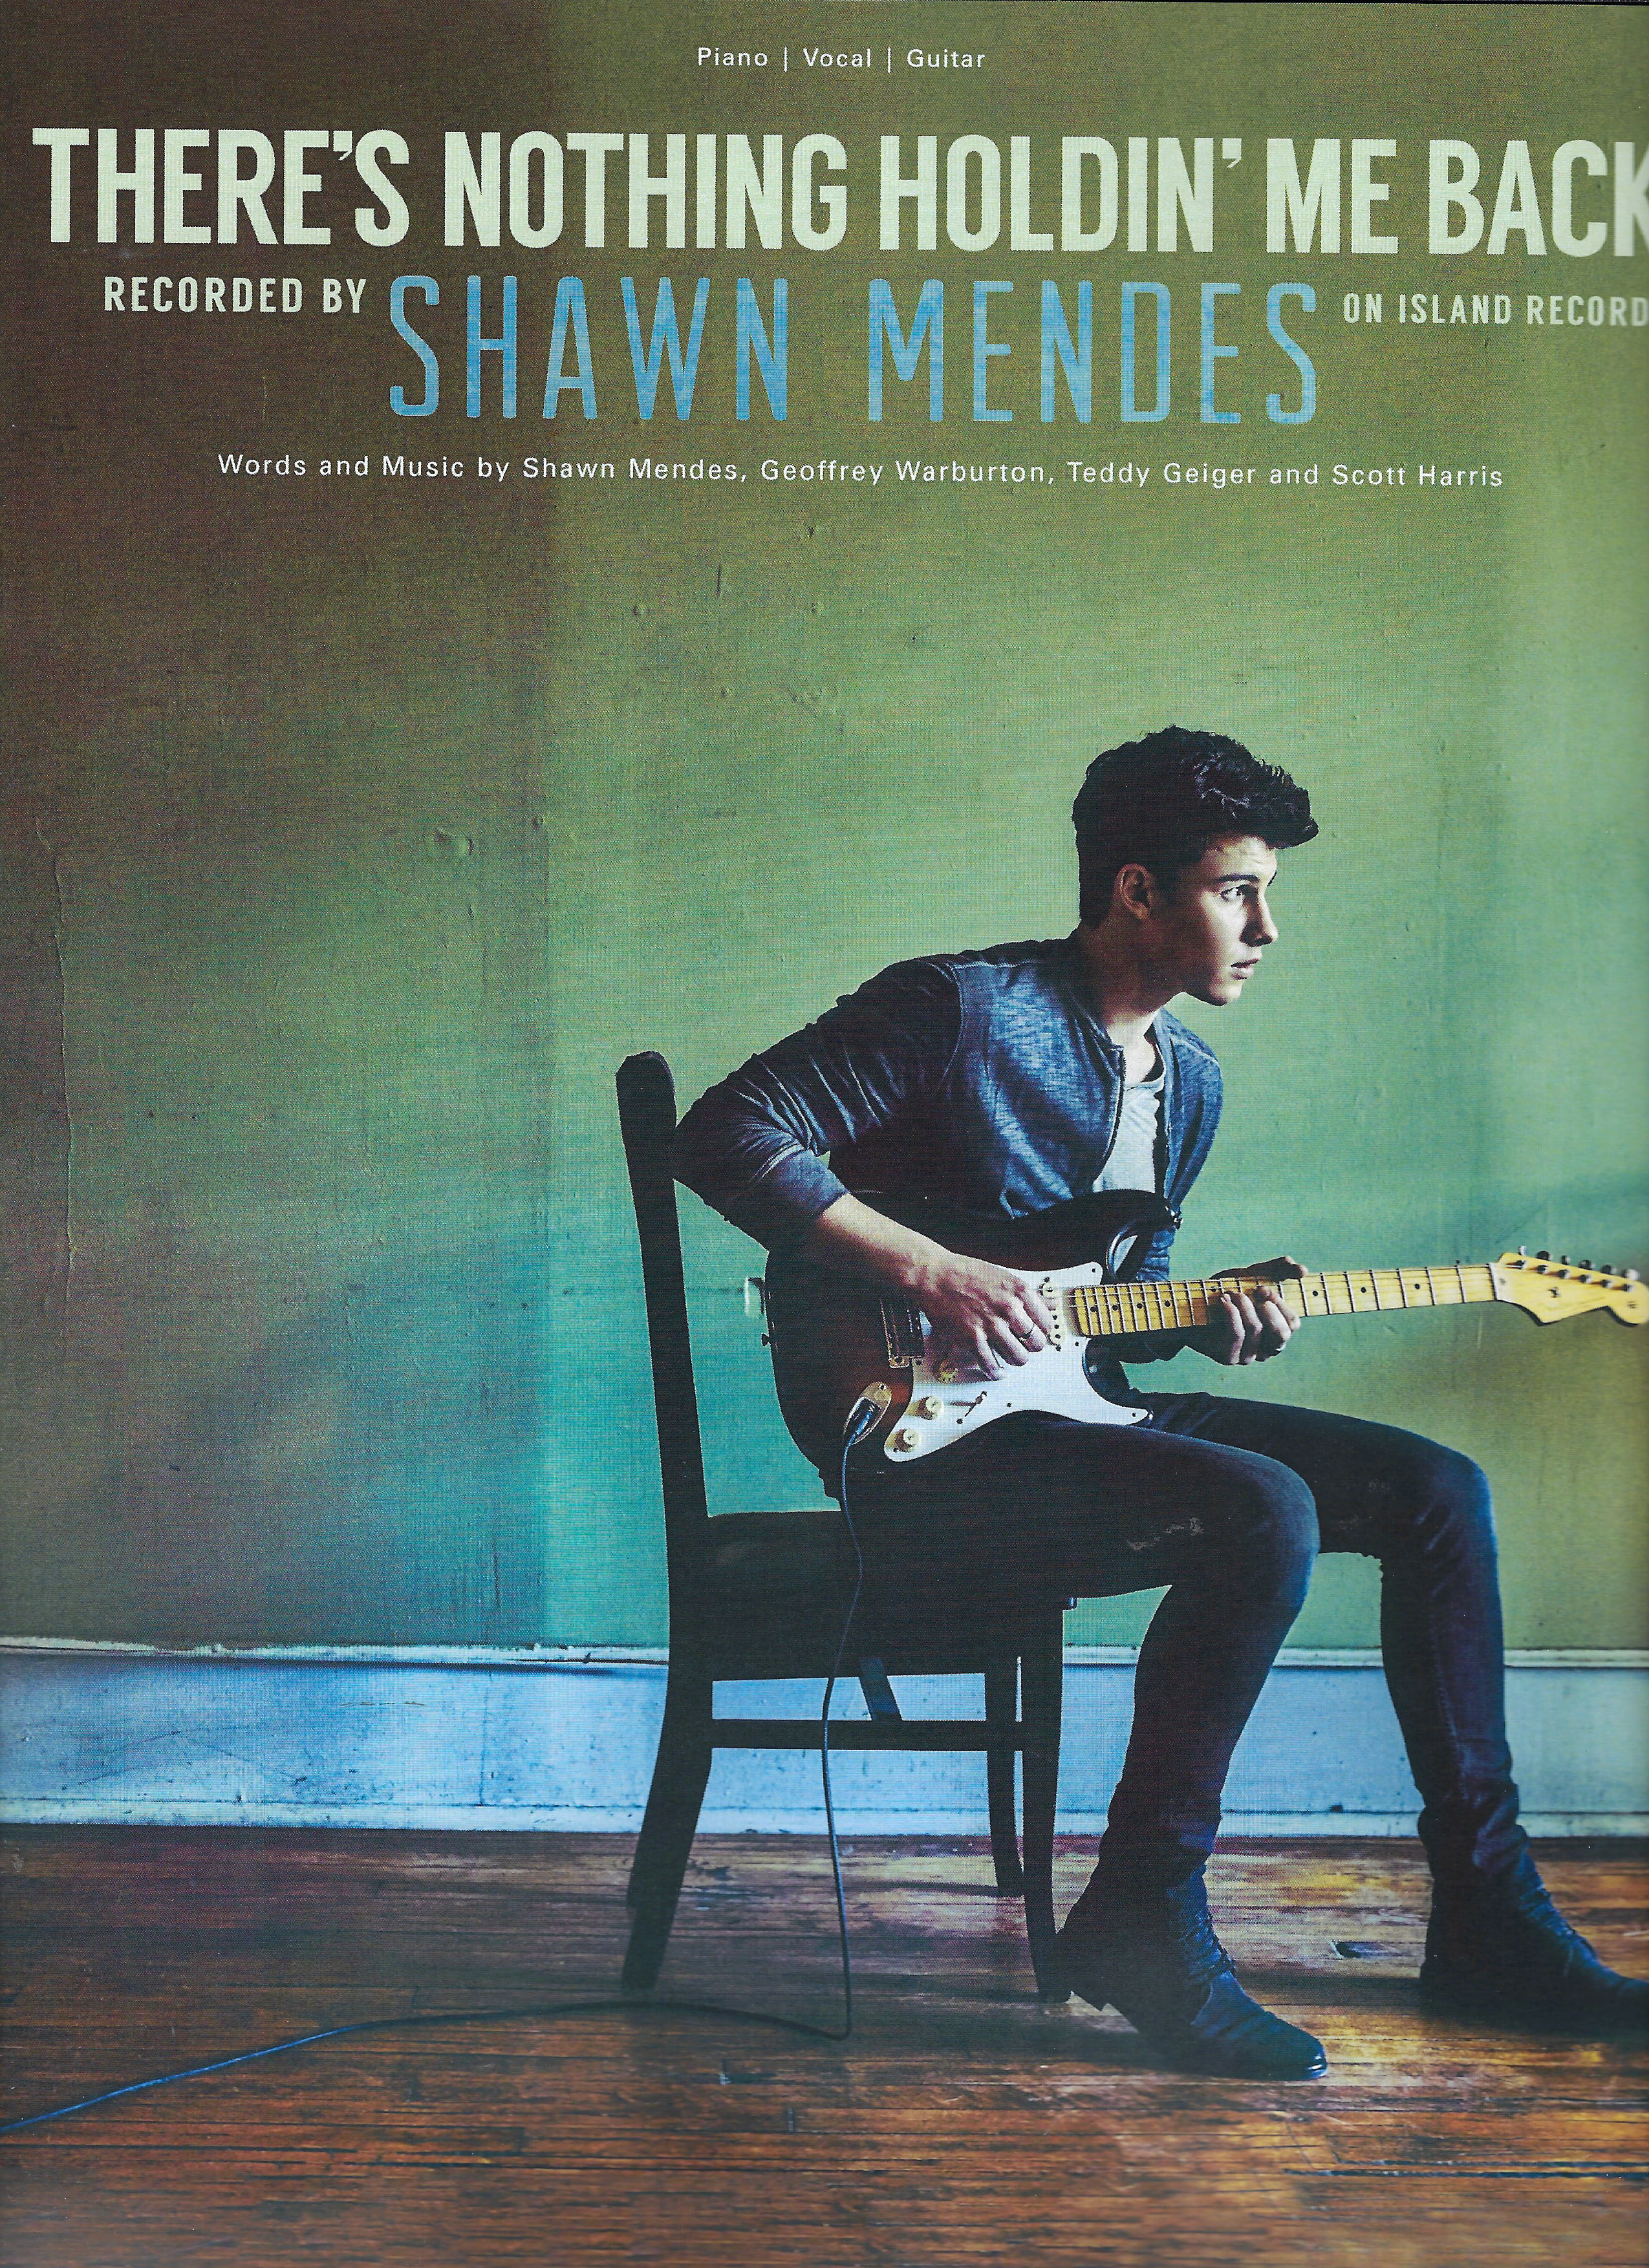 There's Nothing Holdin Me Back Po Polsku Shawn Mendes There's Nothing Holdin' Me Back Sheet Music - Walmart.com